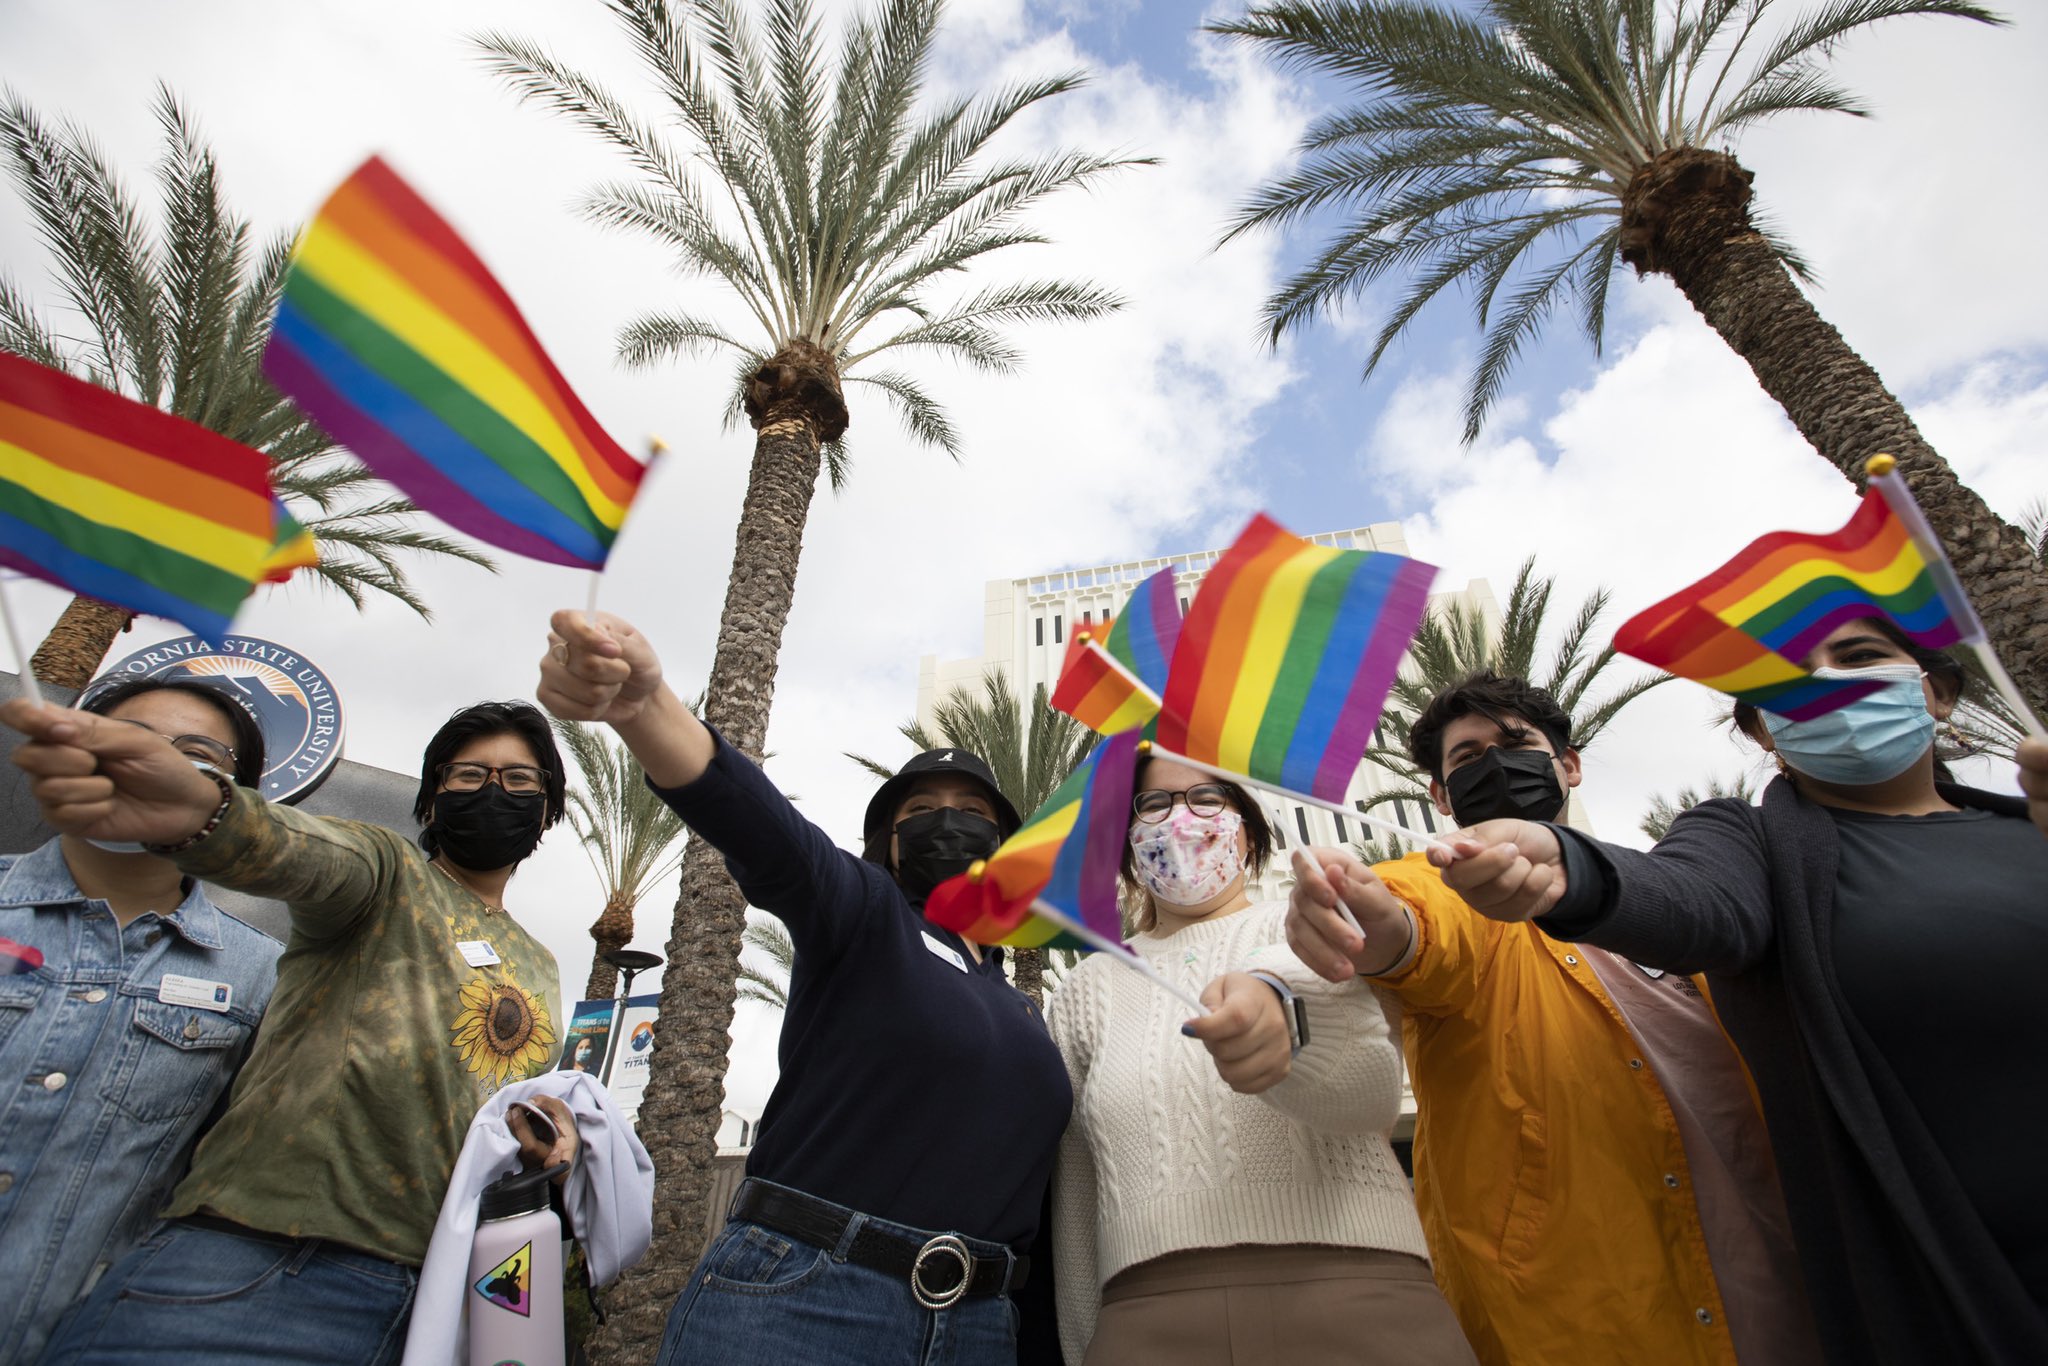 students holding rainbow flags in a group on campus